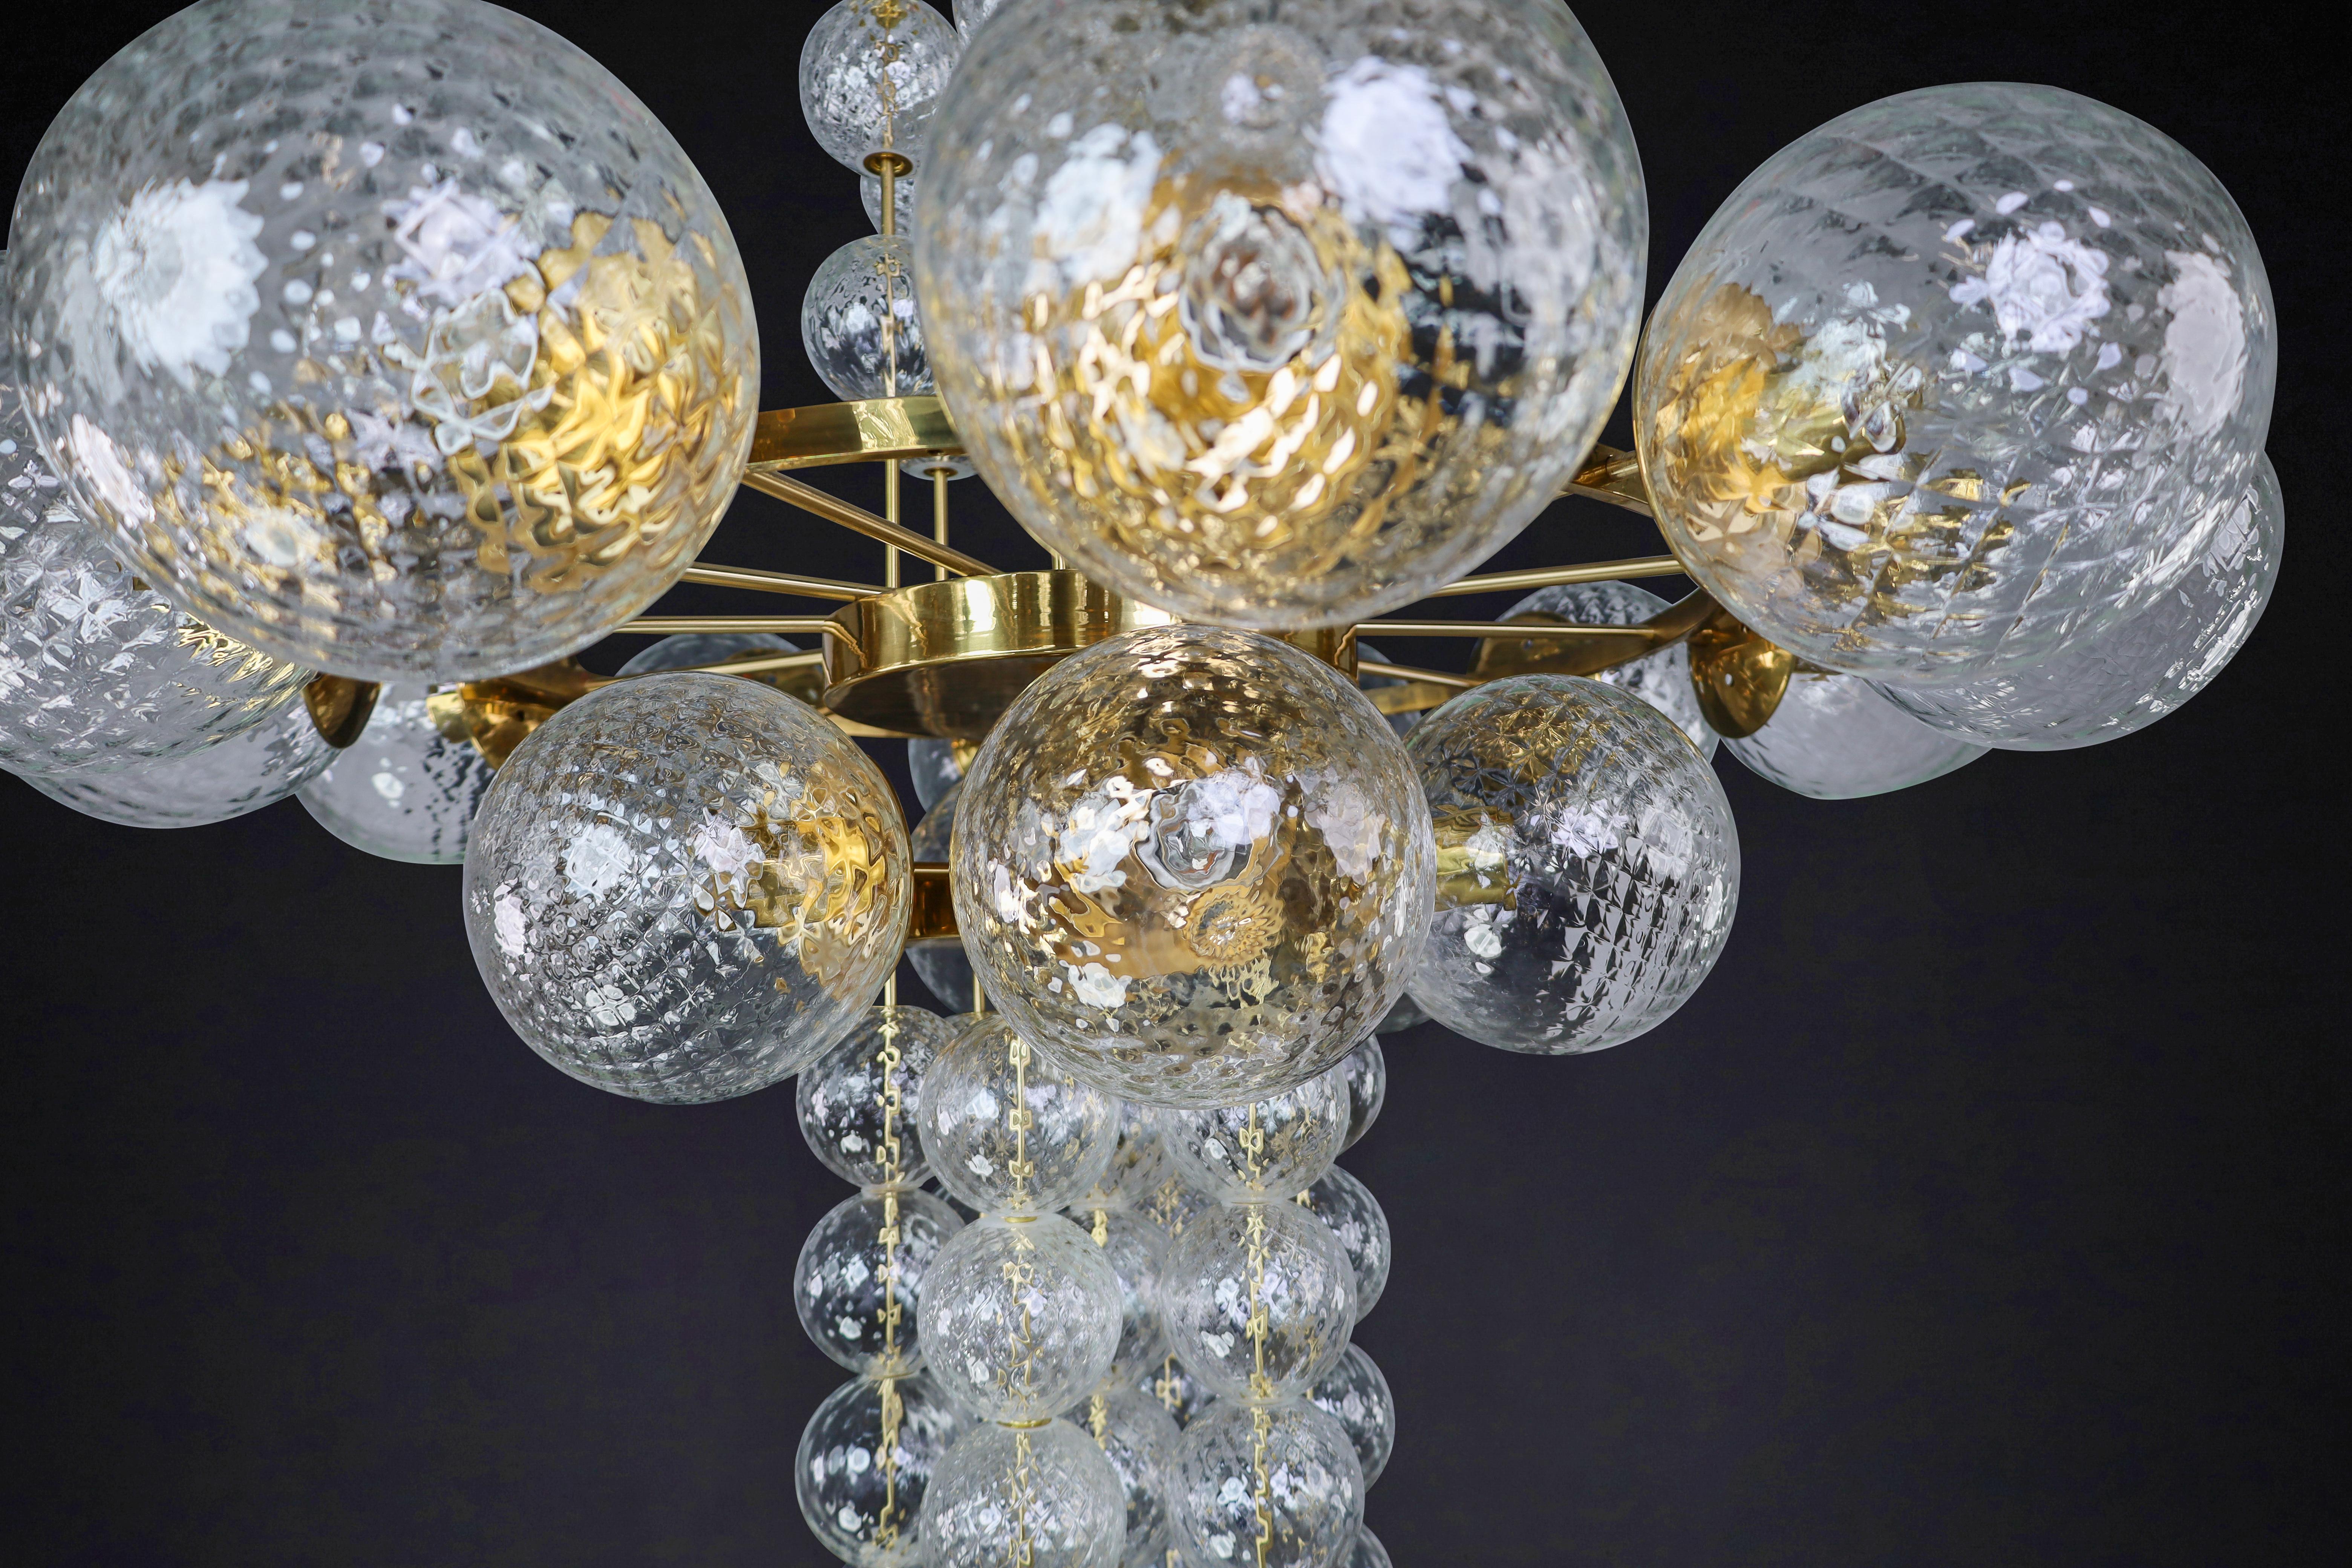 Large Chandelier with brass fixture and hand-blowed glass globes by Preciosa Cz. For Sale 1